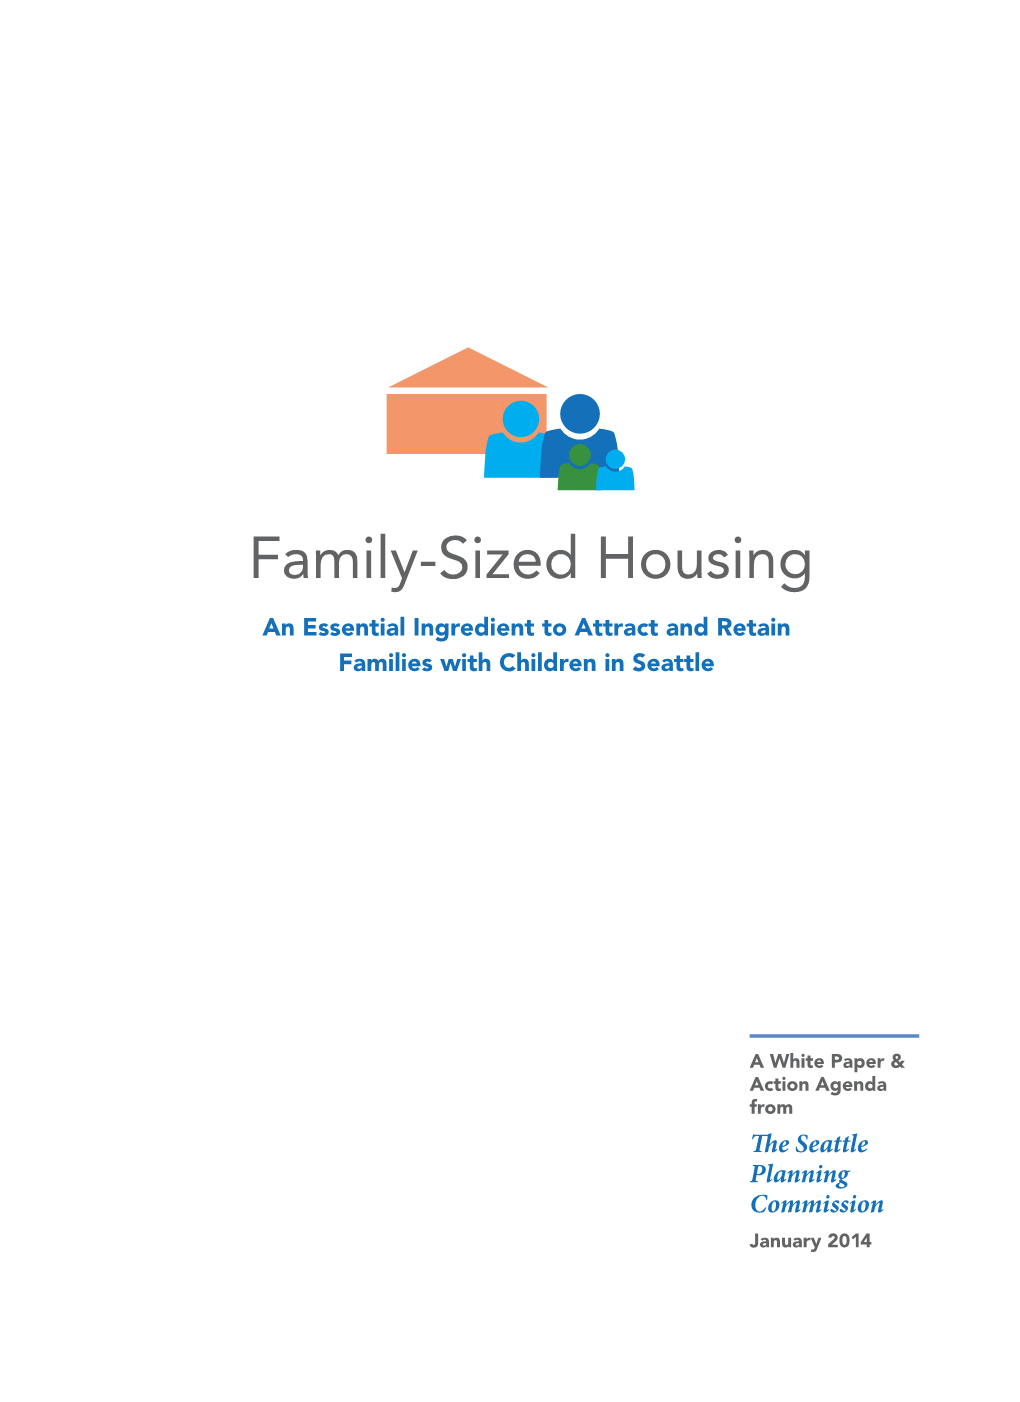 Family-Sized Housing an Essential Ingredient to Attract and Retain Families with Children in Seattle